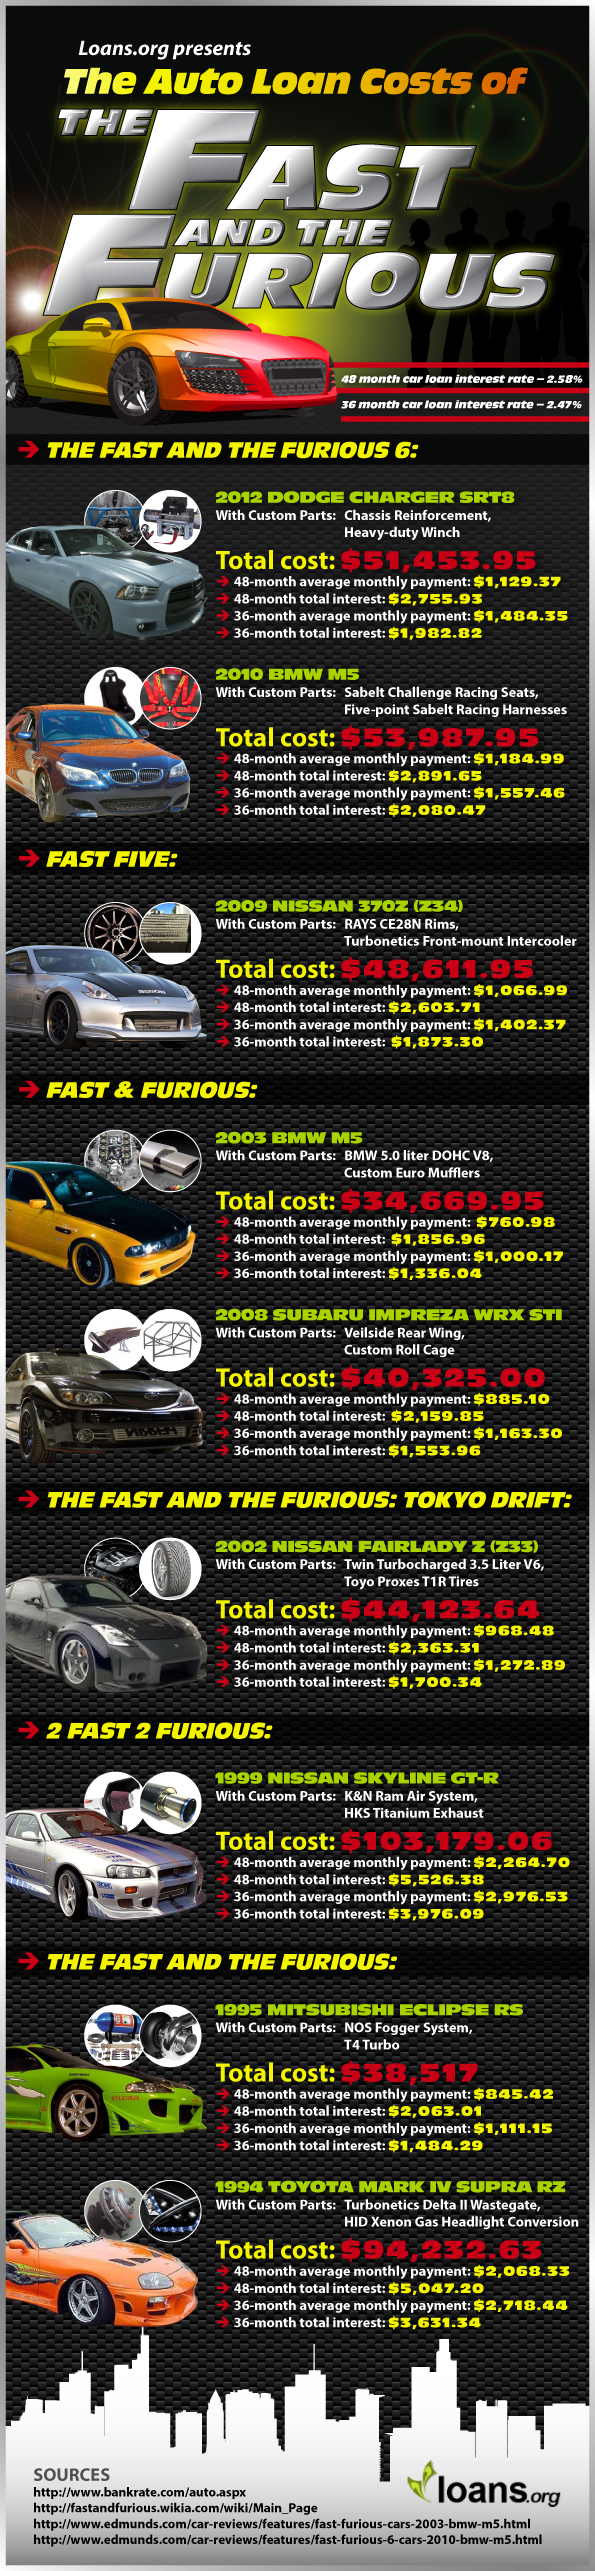 The Auto Loan Costs of The Fast and the Furious